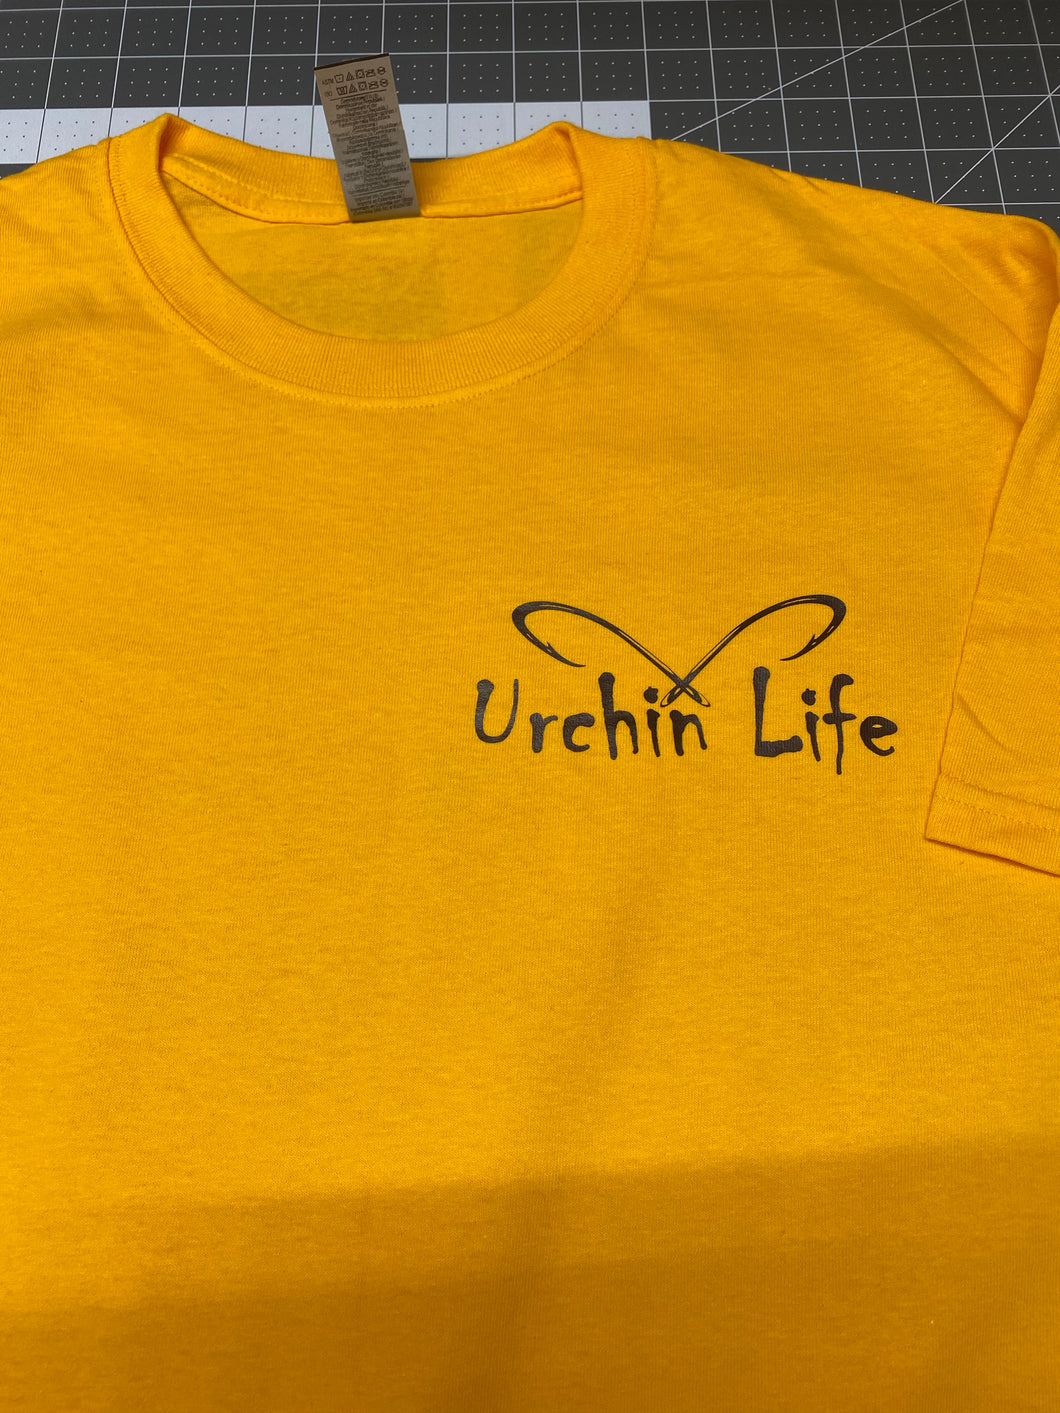 Urchin Life -  Front and Back Design